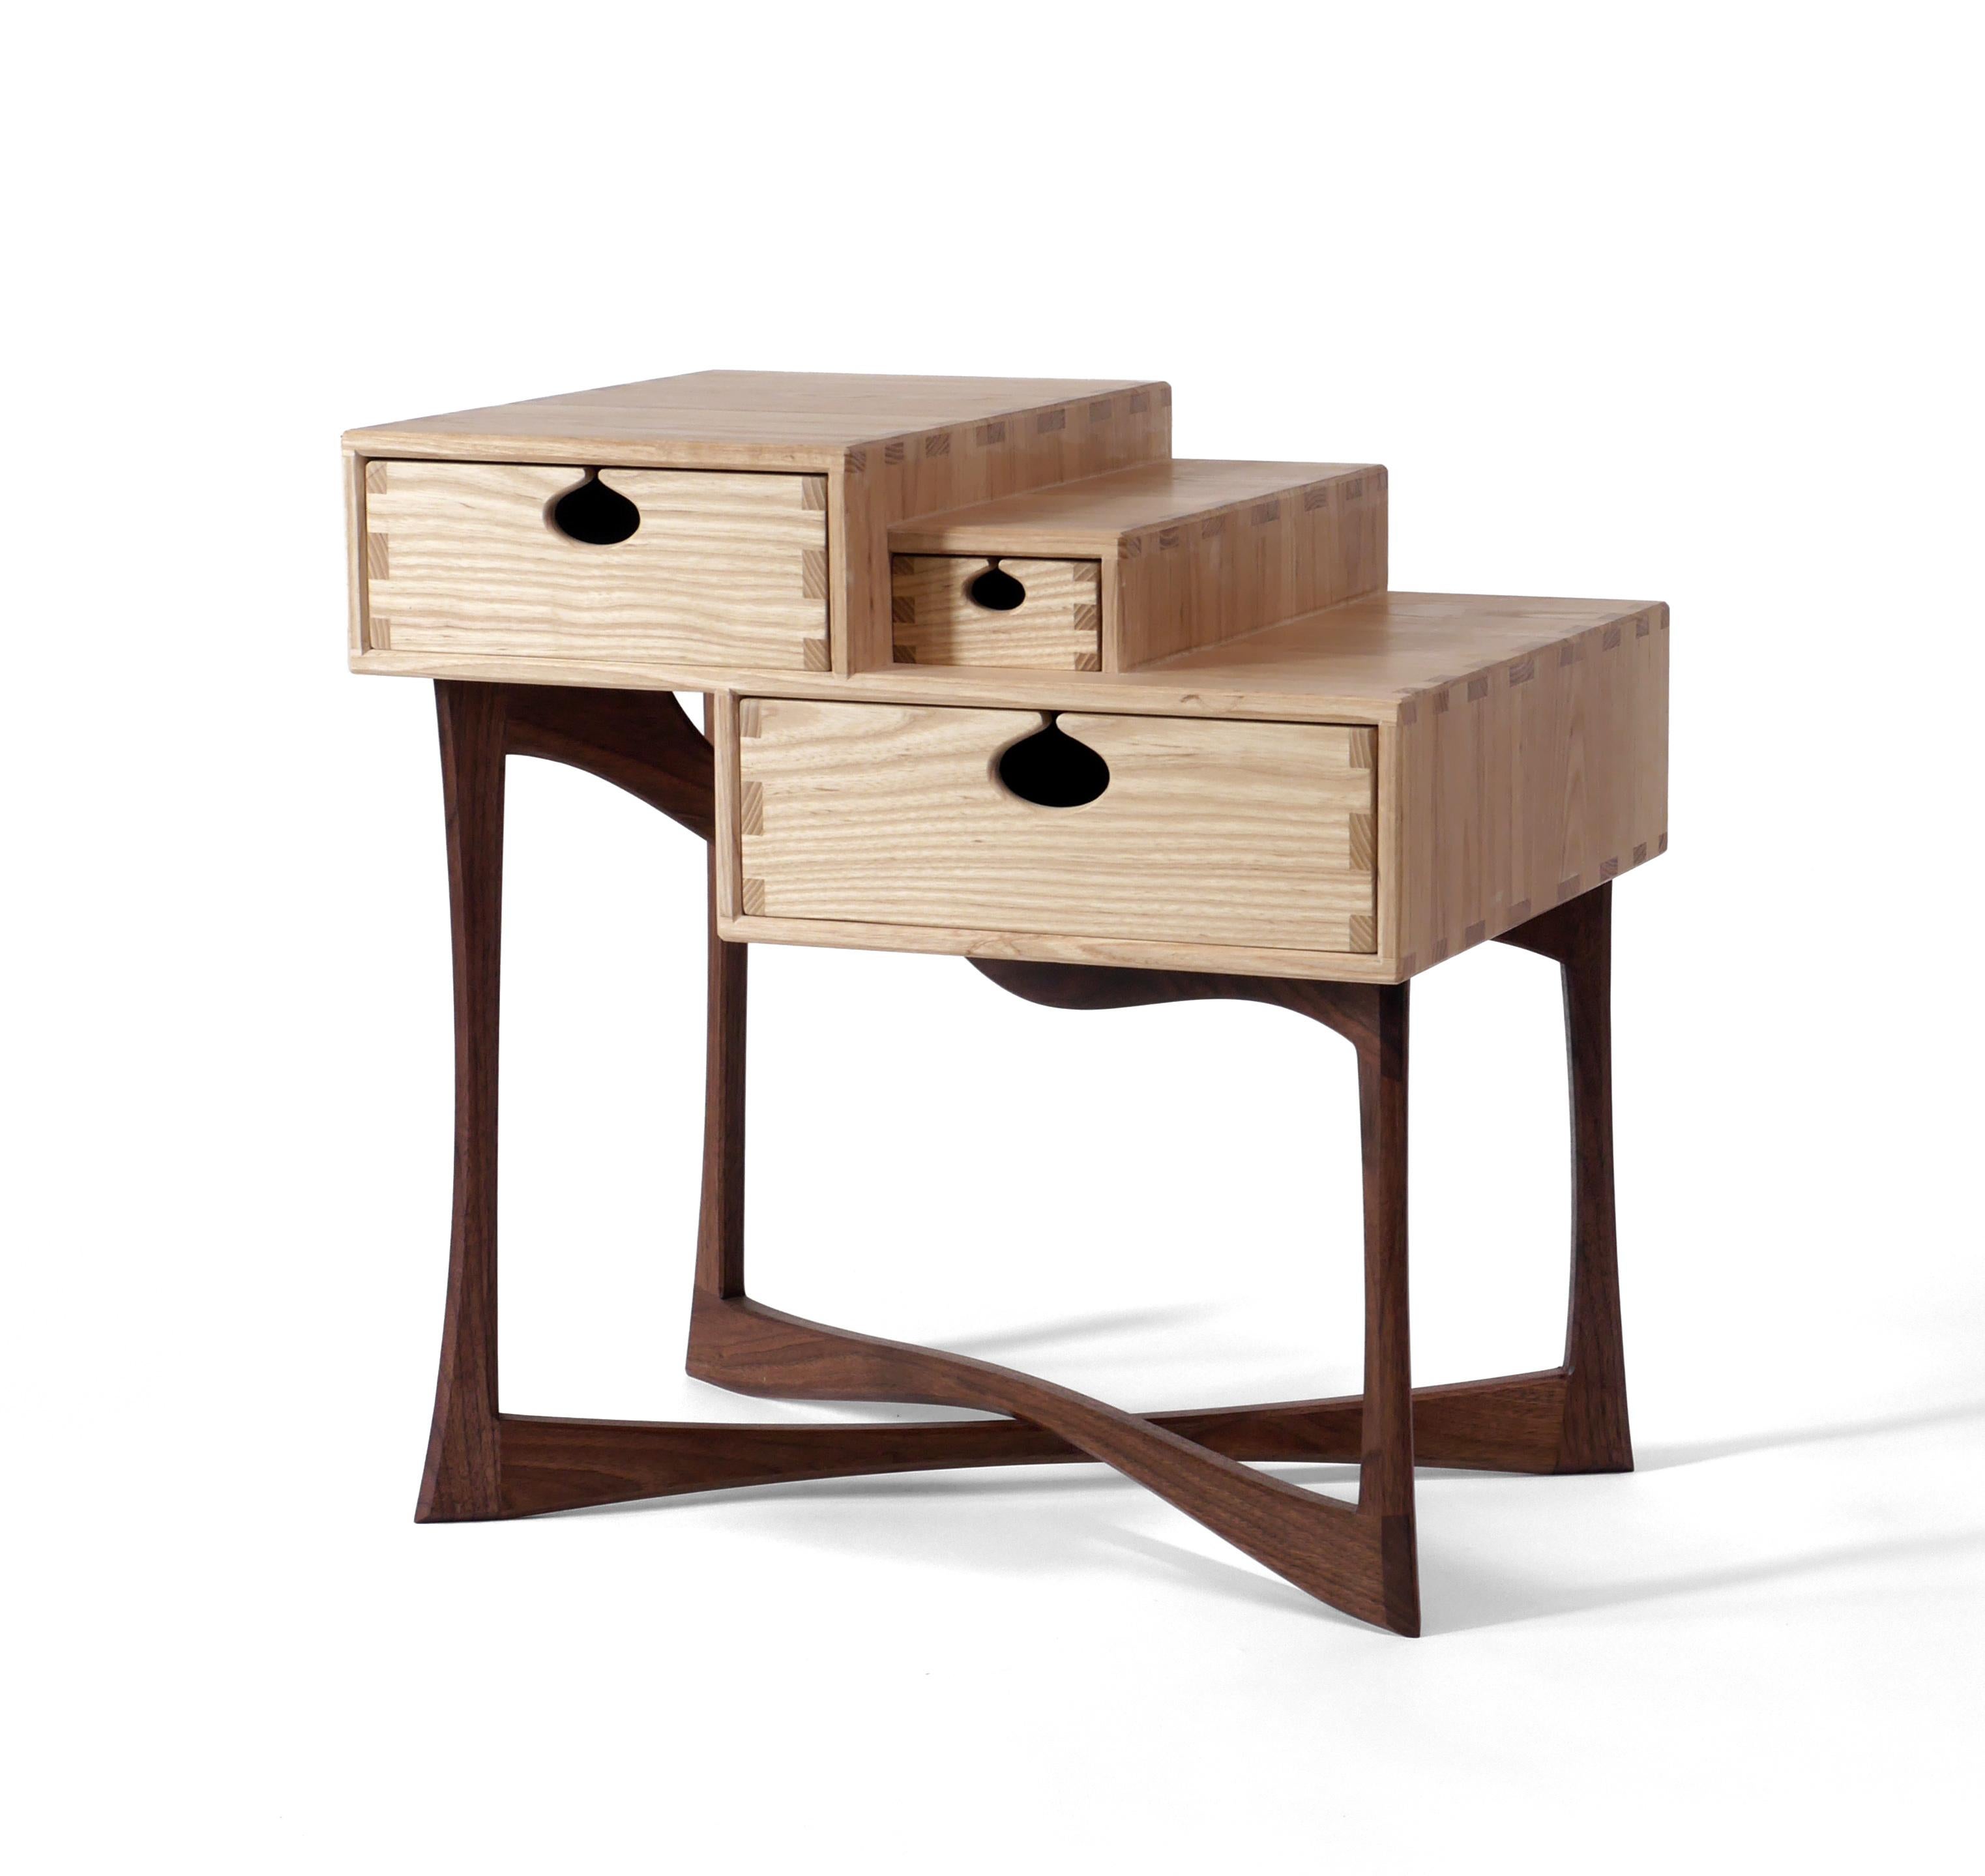 The charismatic Coriolis Side Table is made out of solid black walnut legs that support three drawers mounted on wooden runners in traditional drawer boxes made out of solid white ash. It’s built with exposed joinery that has been carefully designed